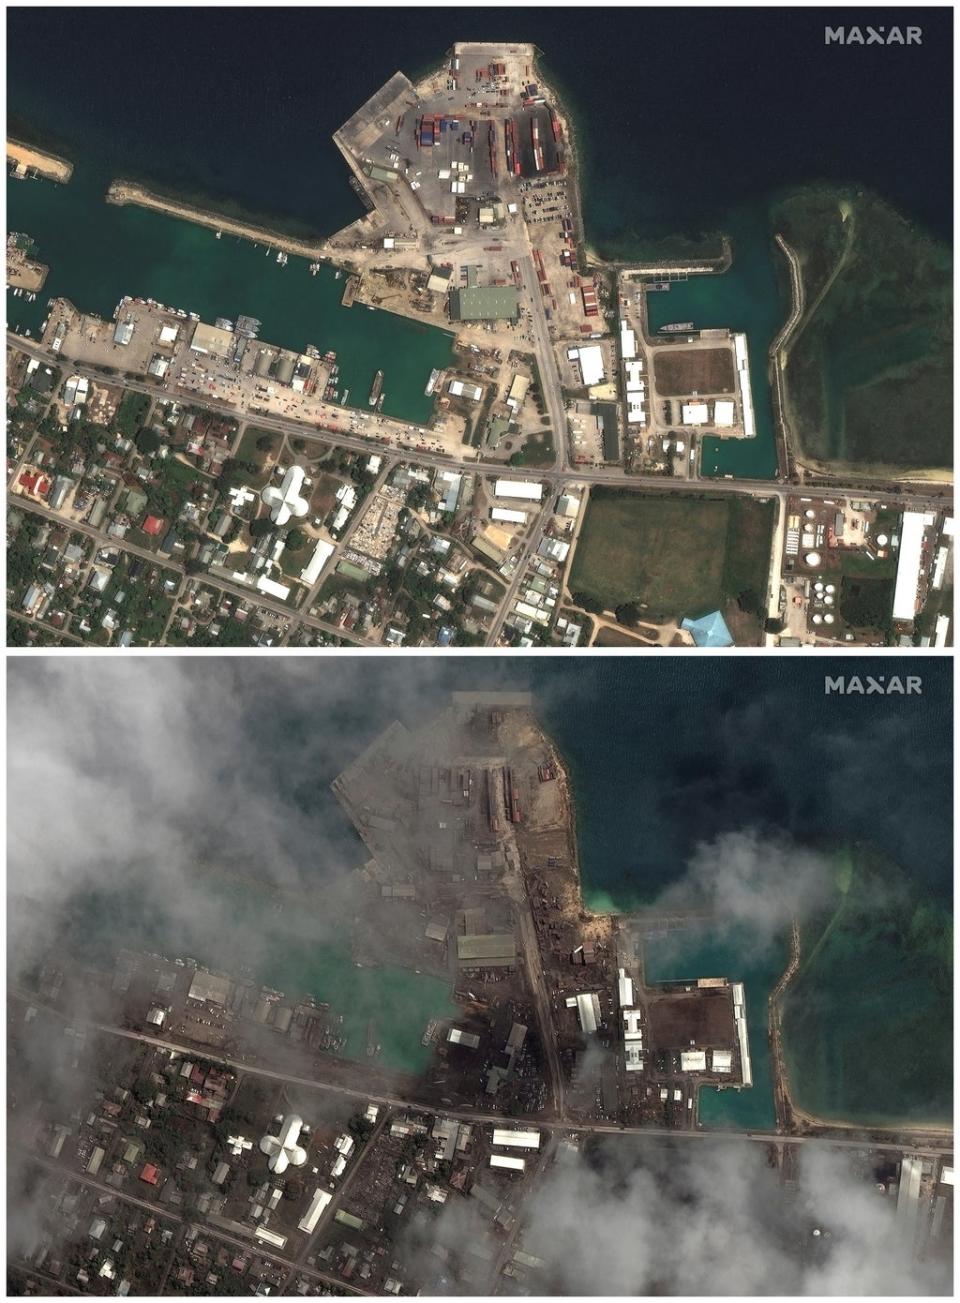 Satellite images show the main port facilites before and after the main eruption (via REUTERS)